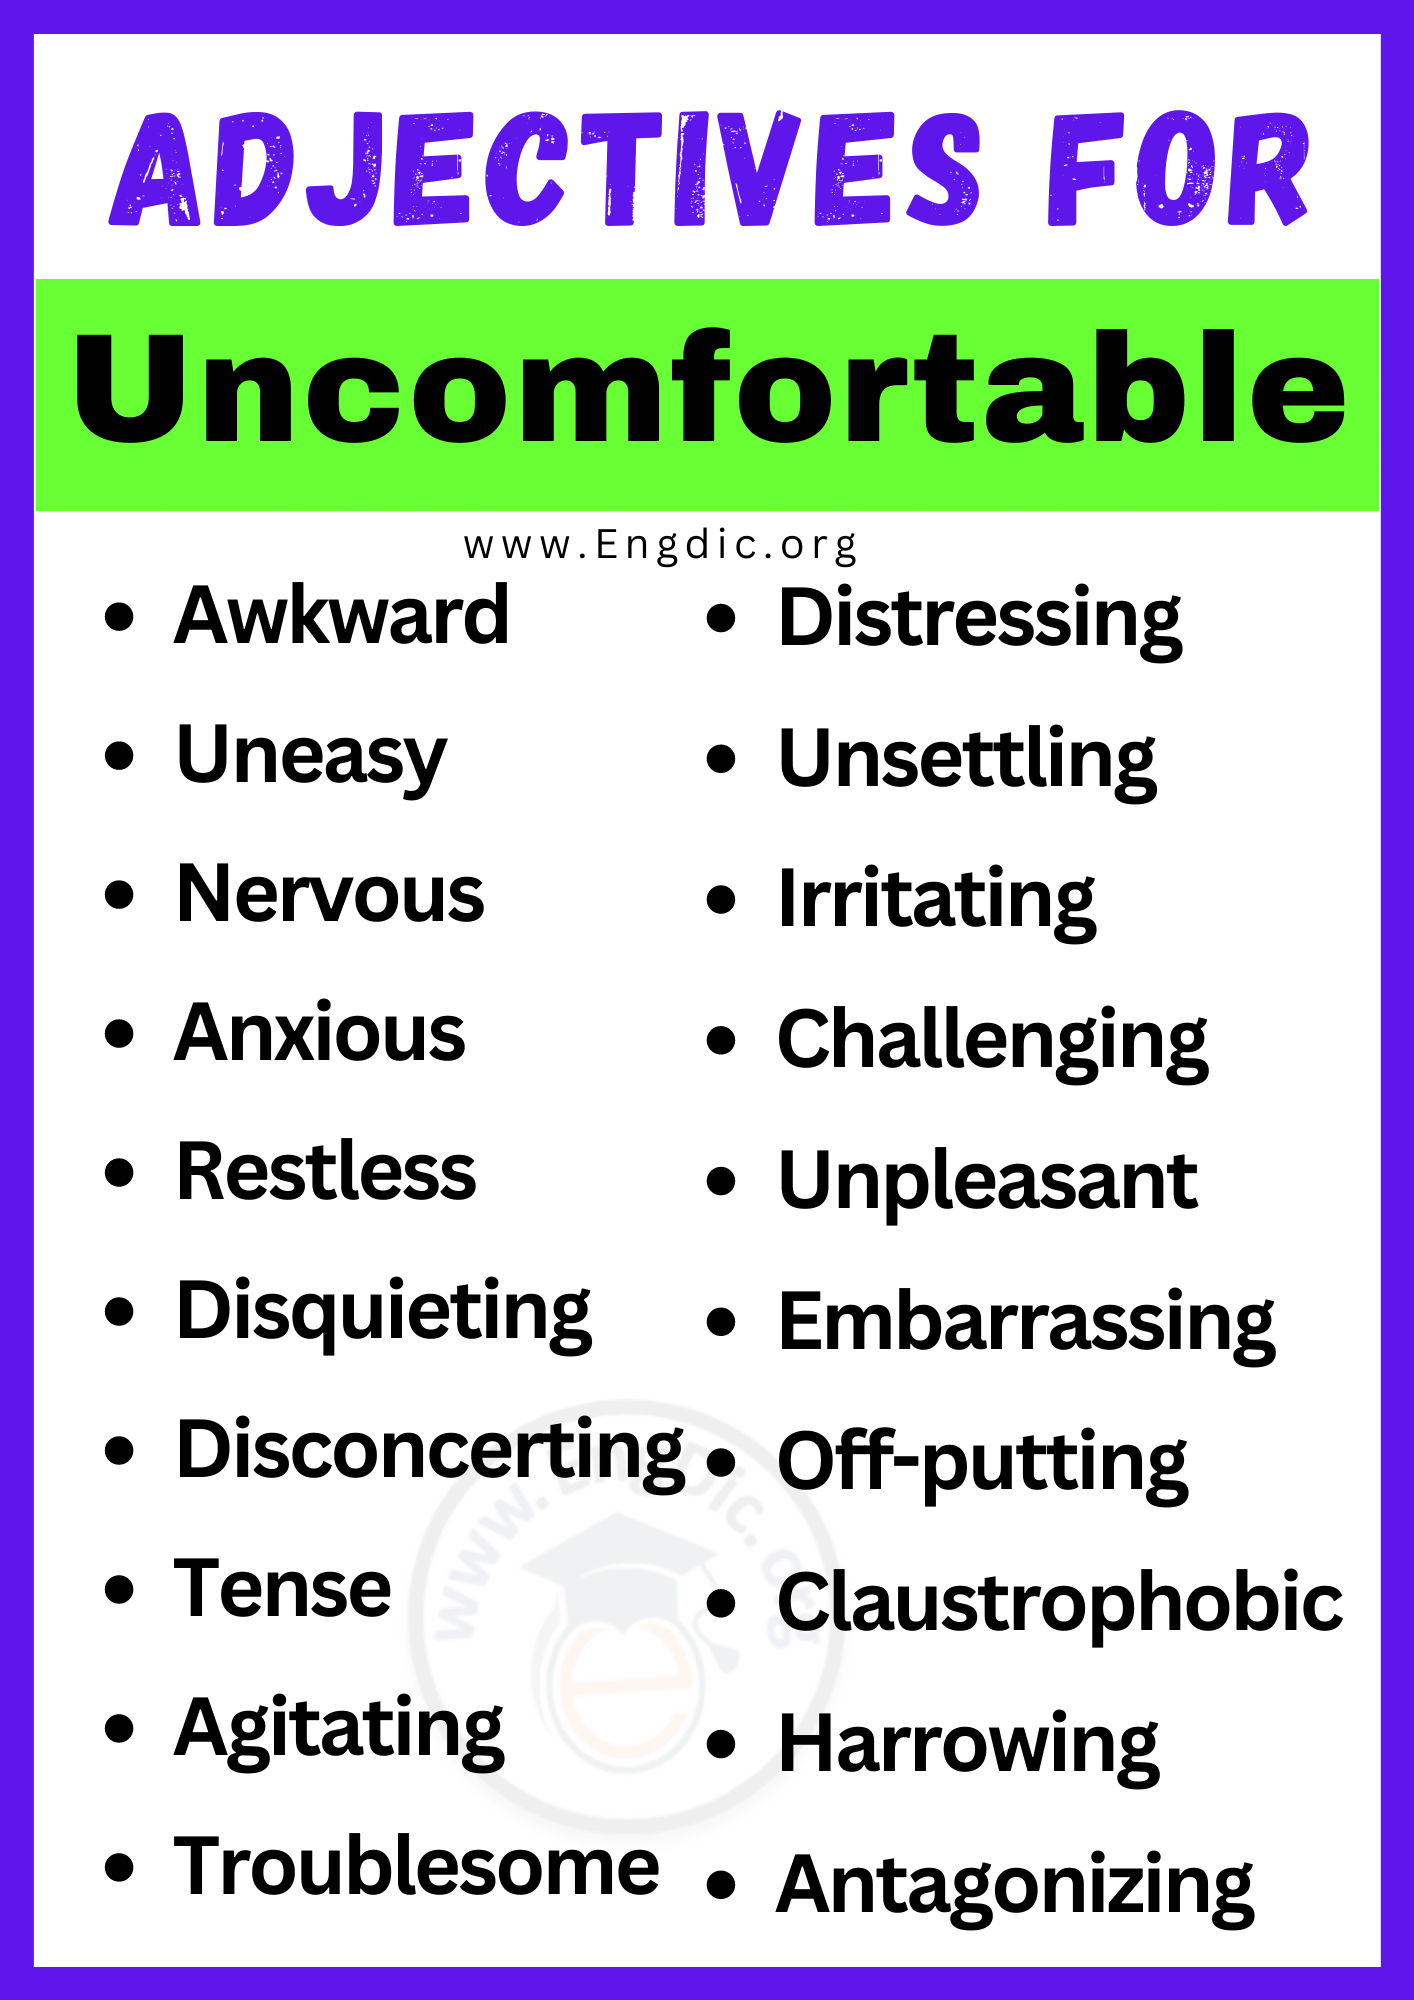 Adjectives for Uncomfortable